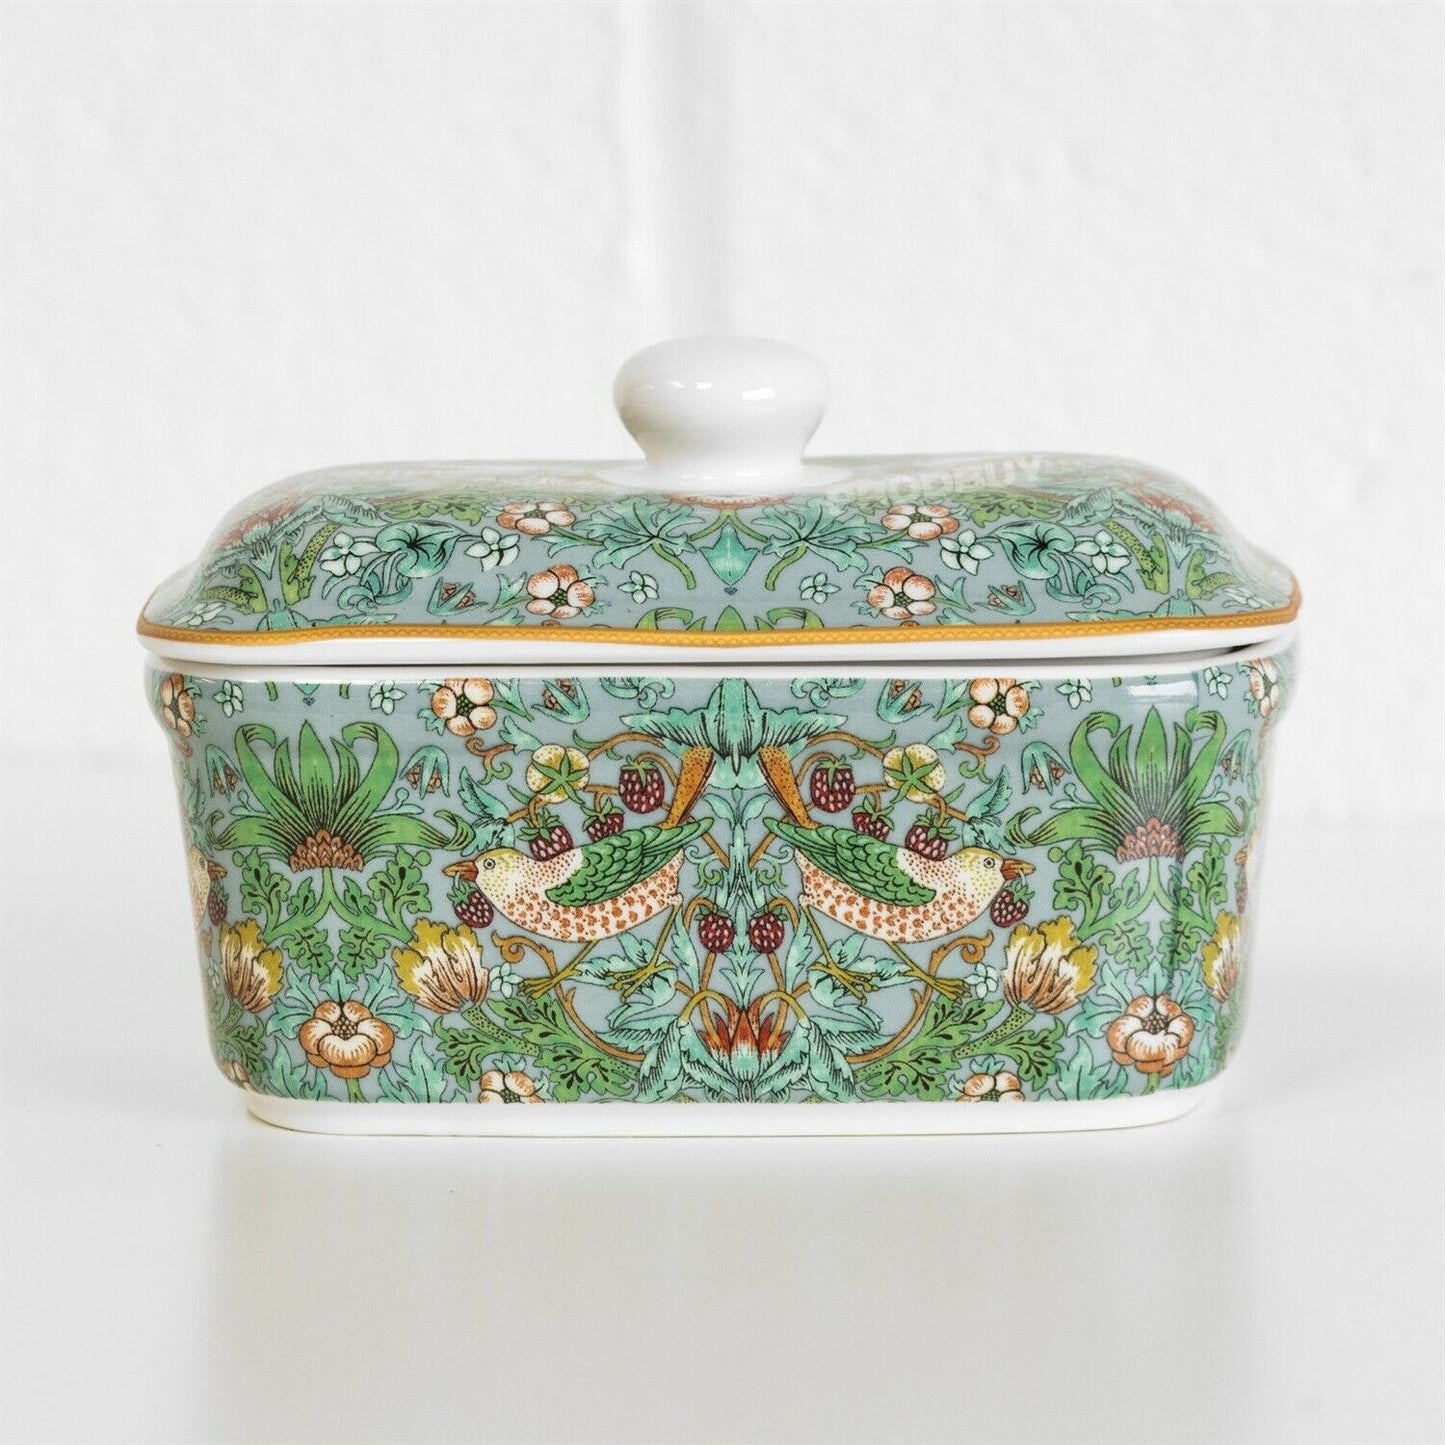 William Morris Teal Strawberry Thief Butter Dish